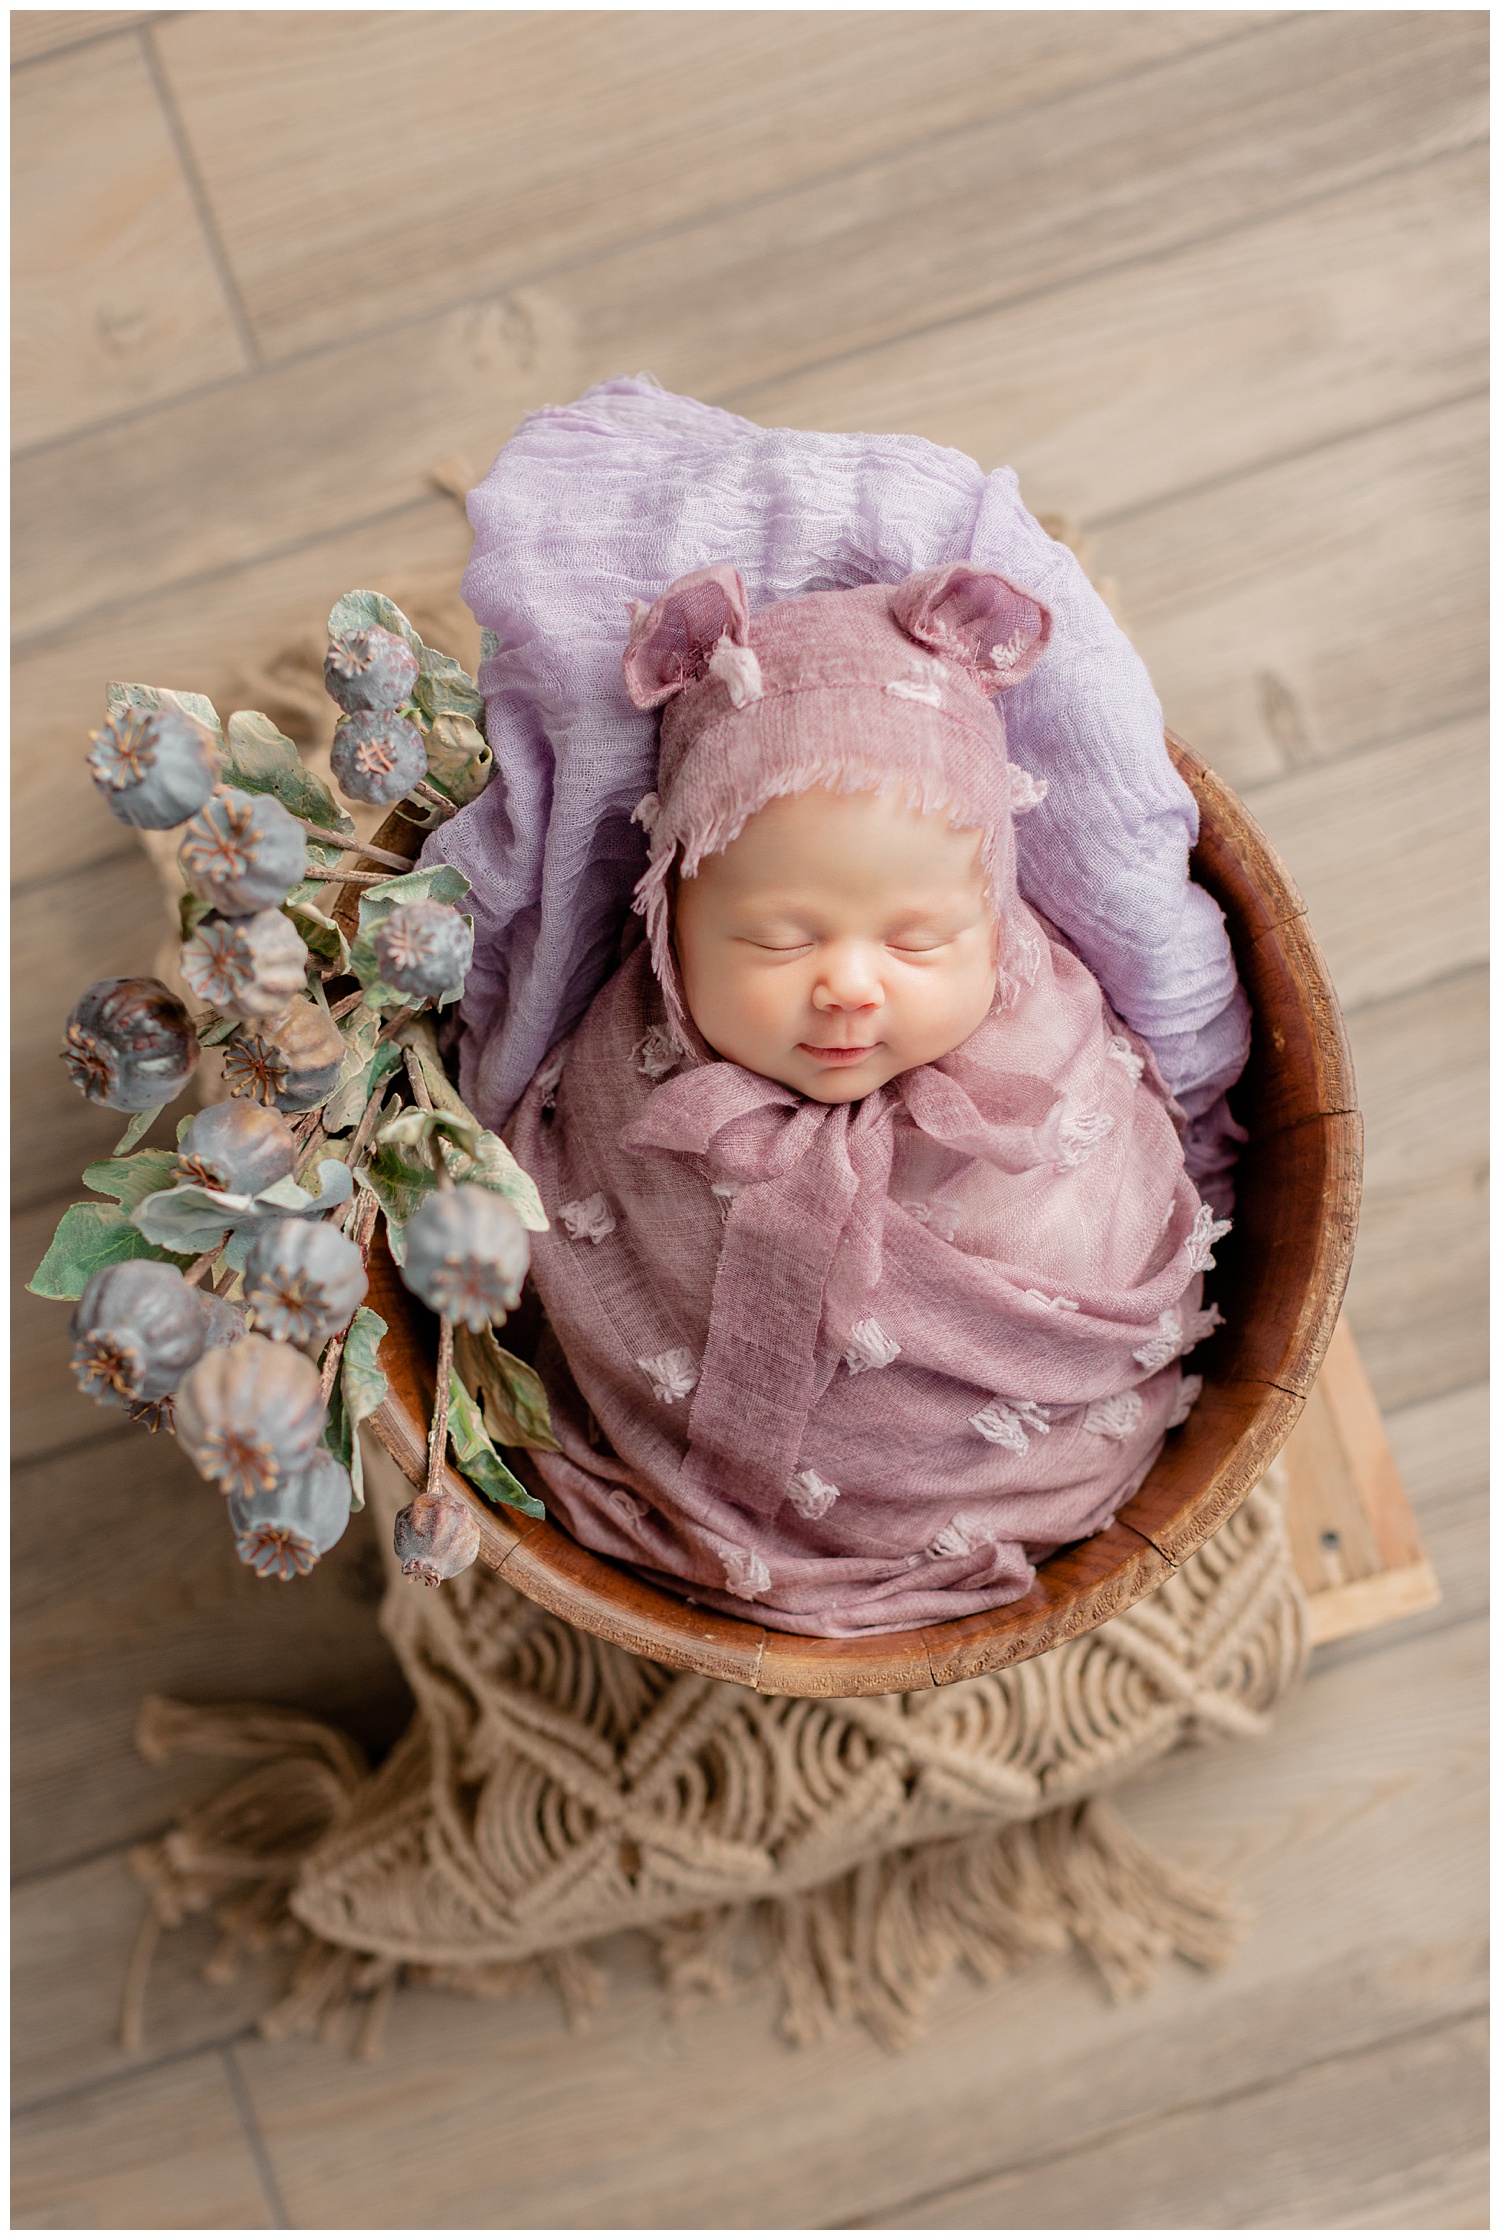 Newborn baby girl Remi swaddled in a mauve textured wrap and bear ear bonnet lying in a basket full of flowers | CB Studio